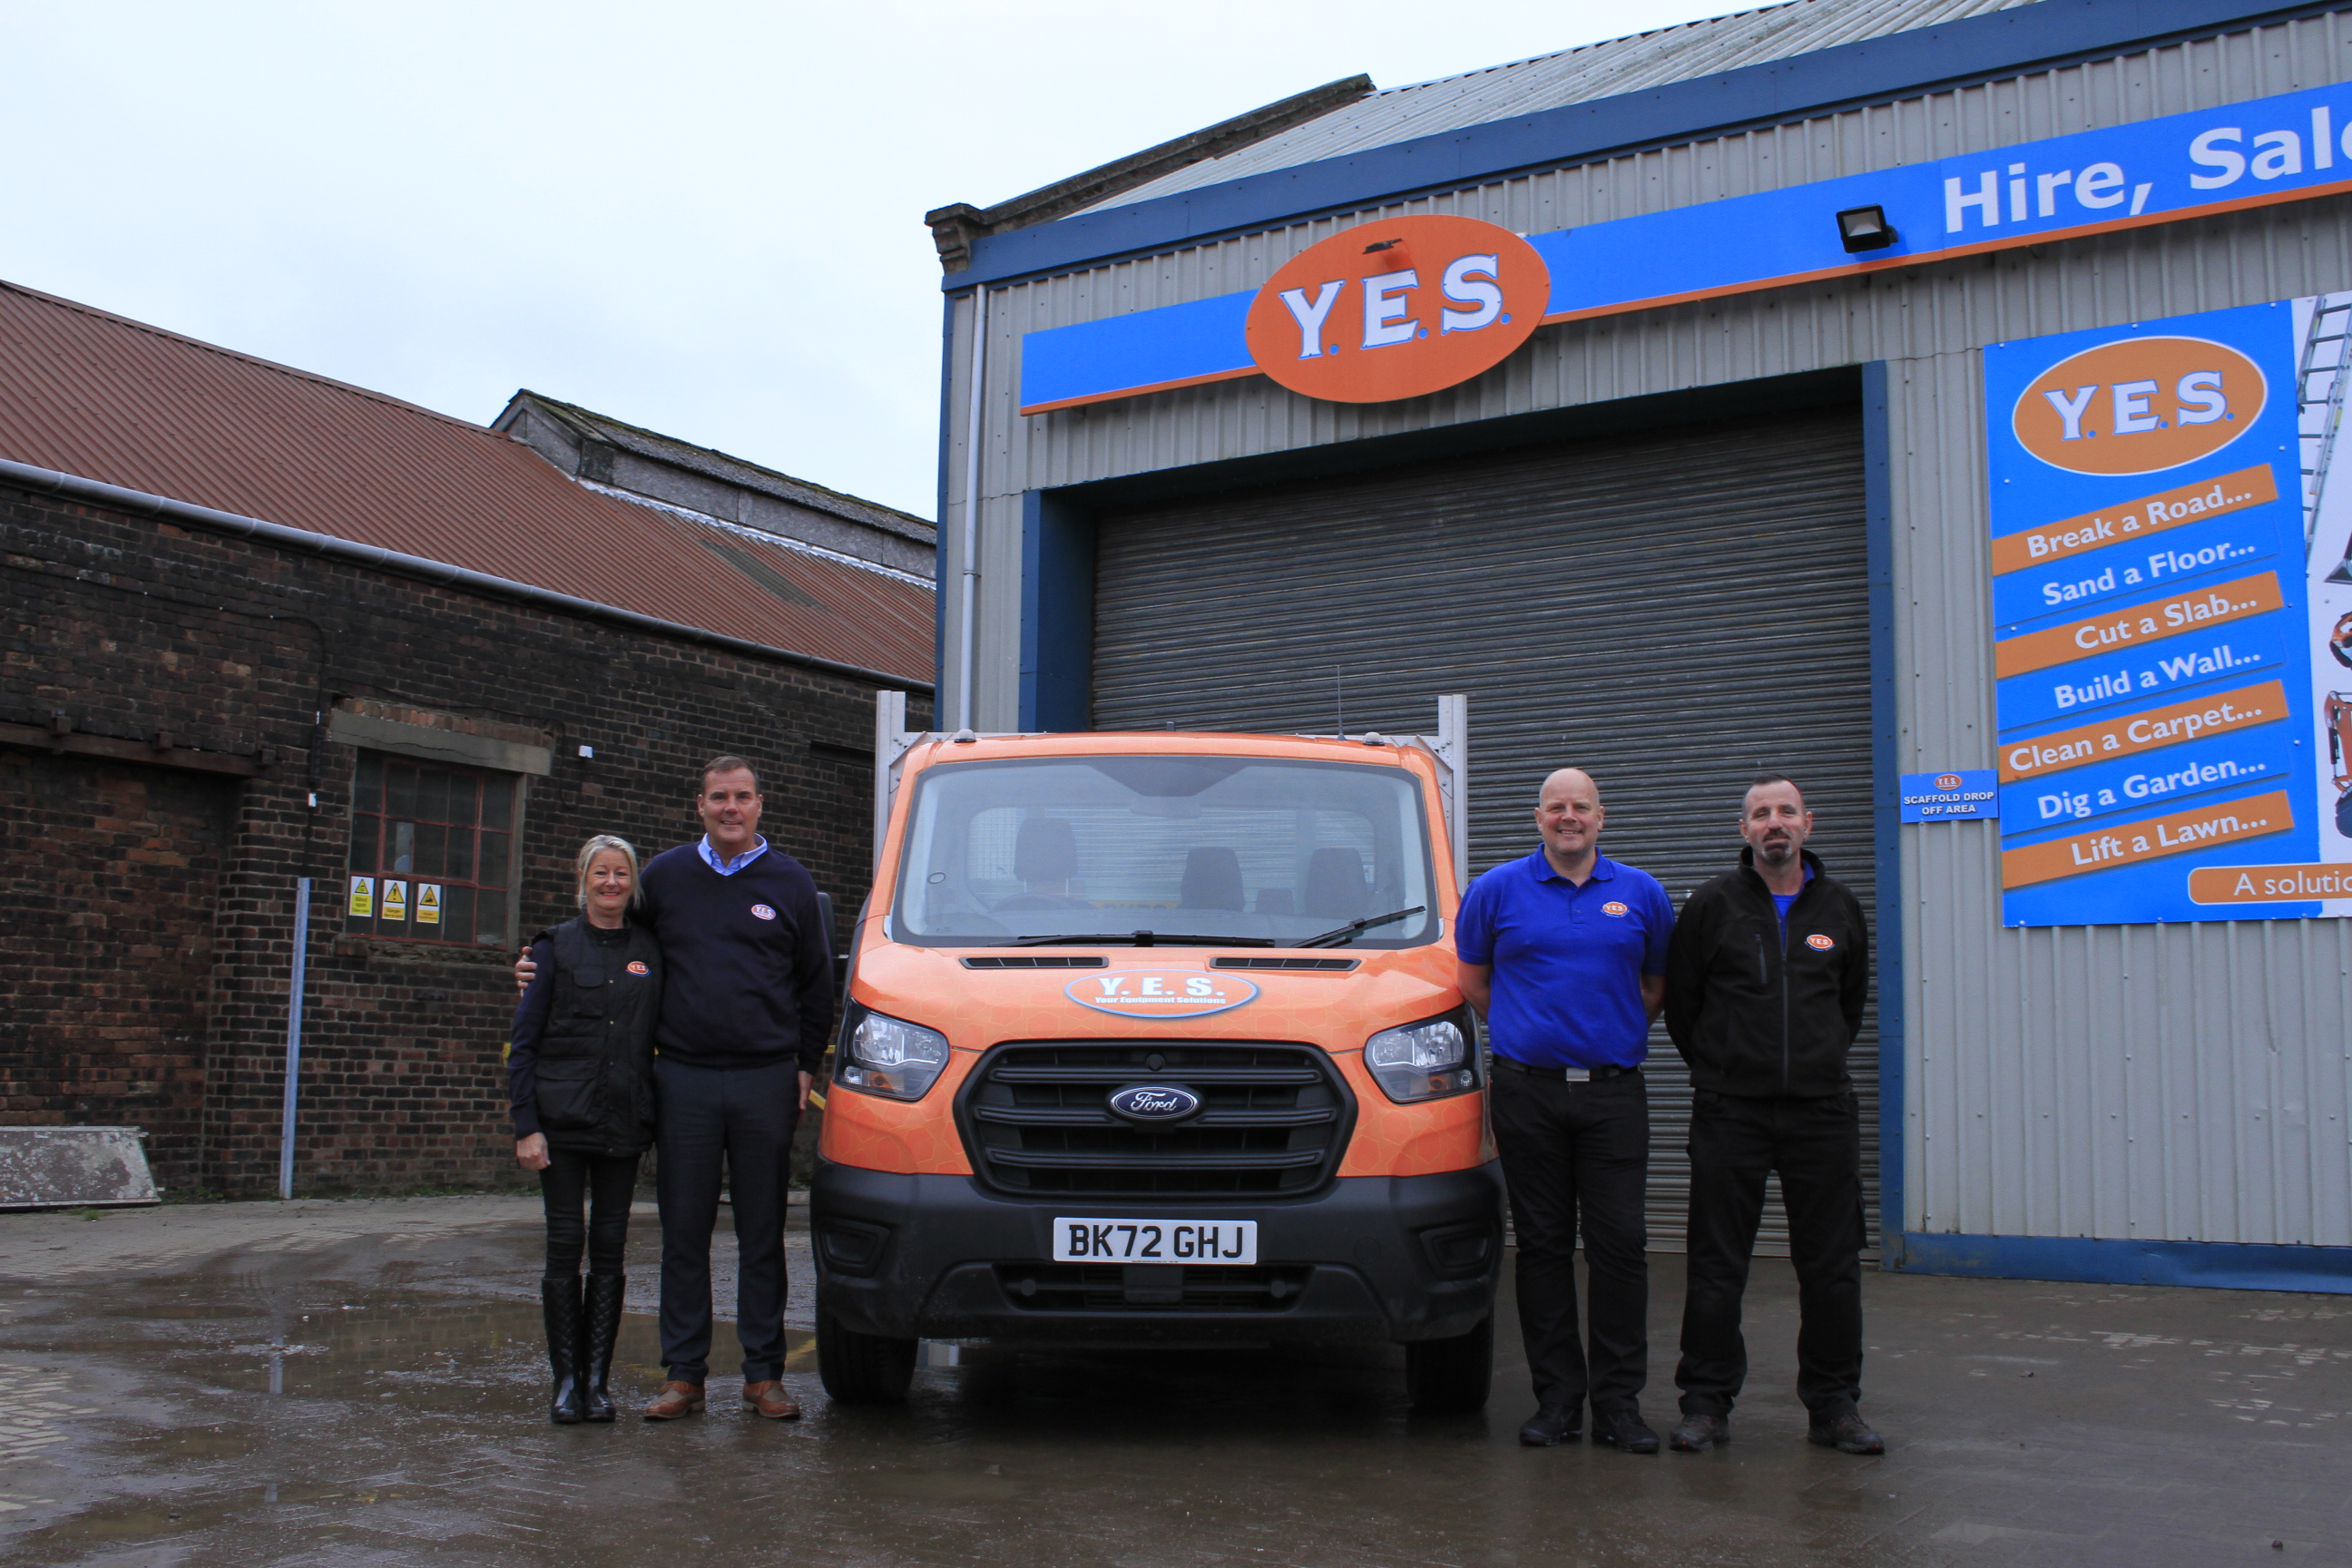 Plant and tool hire company says Y.E.S to employee ownership